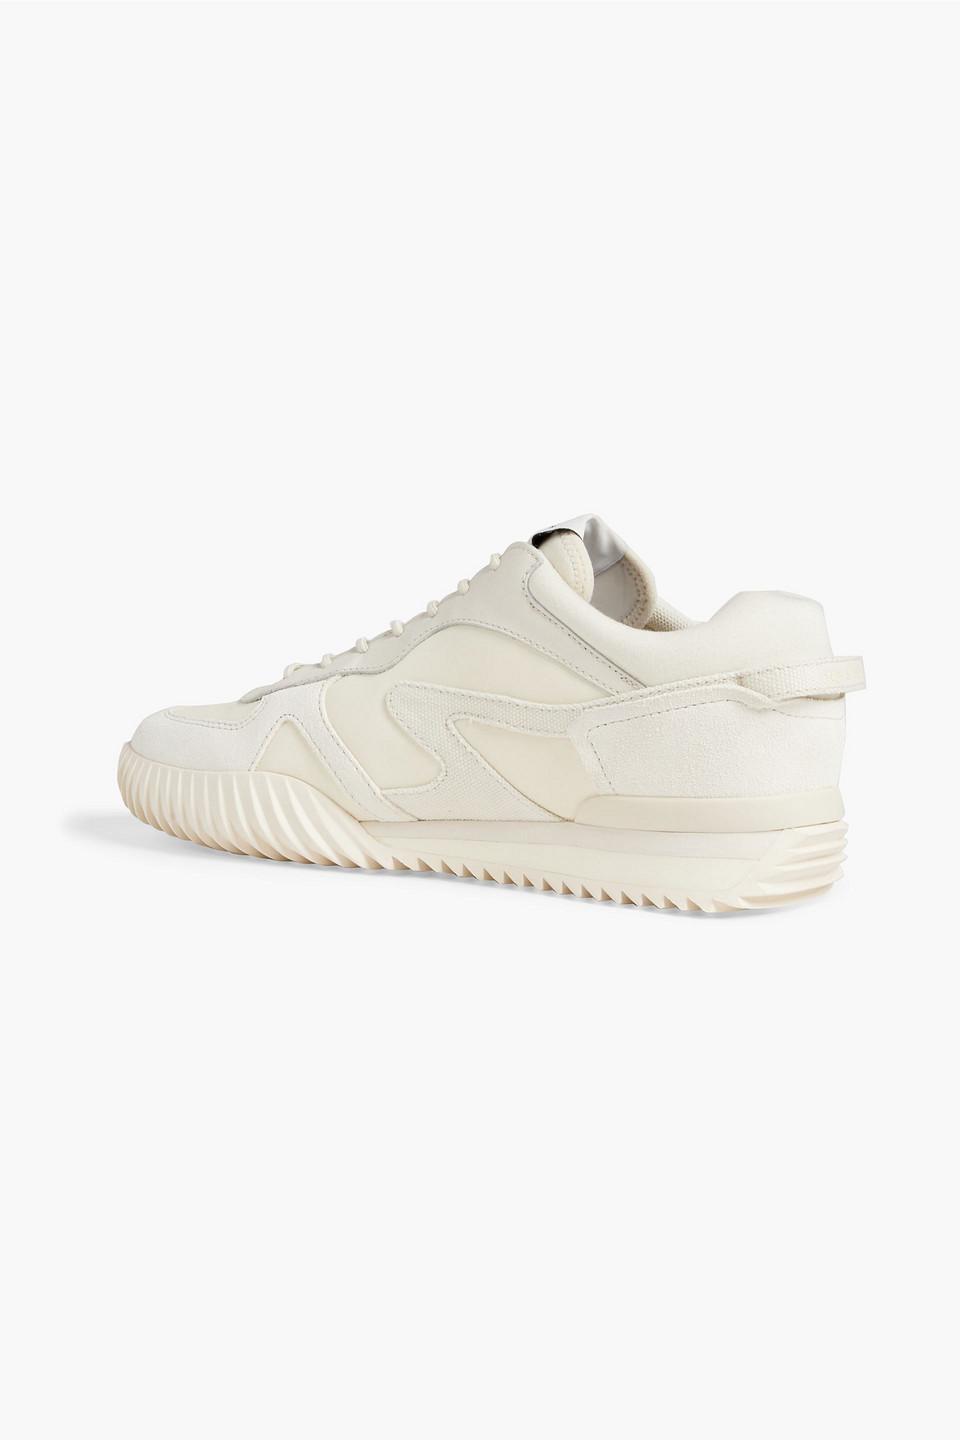 Rag & Bone Retro Runner 2.0 Shell, Canvas, Leather And Suede Sneakers in  White | Lyst